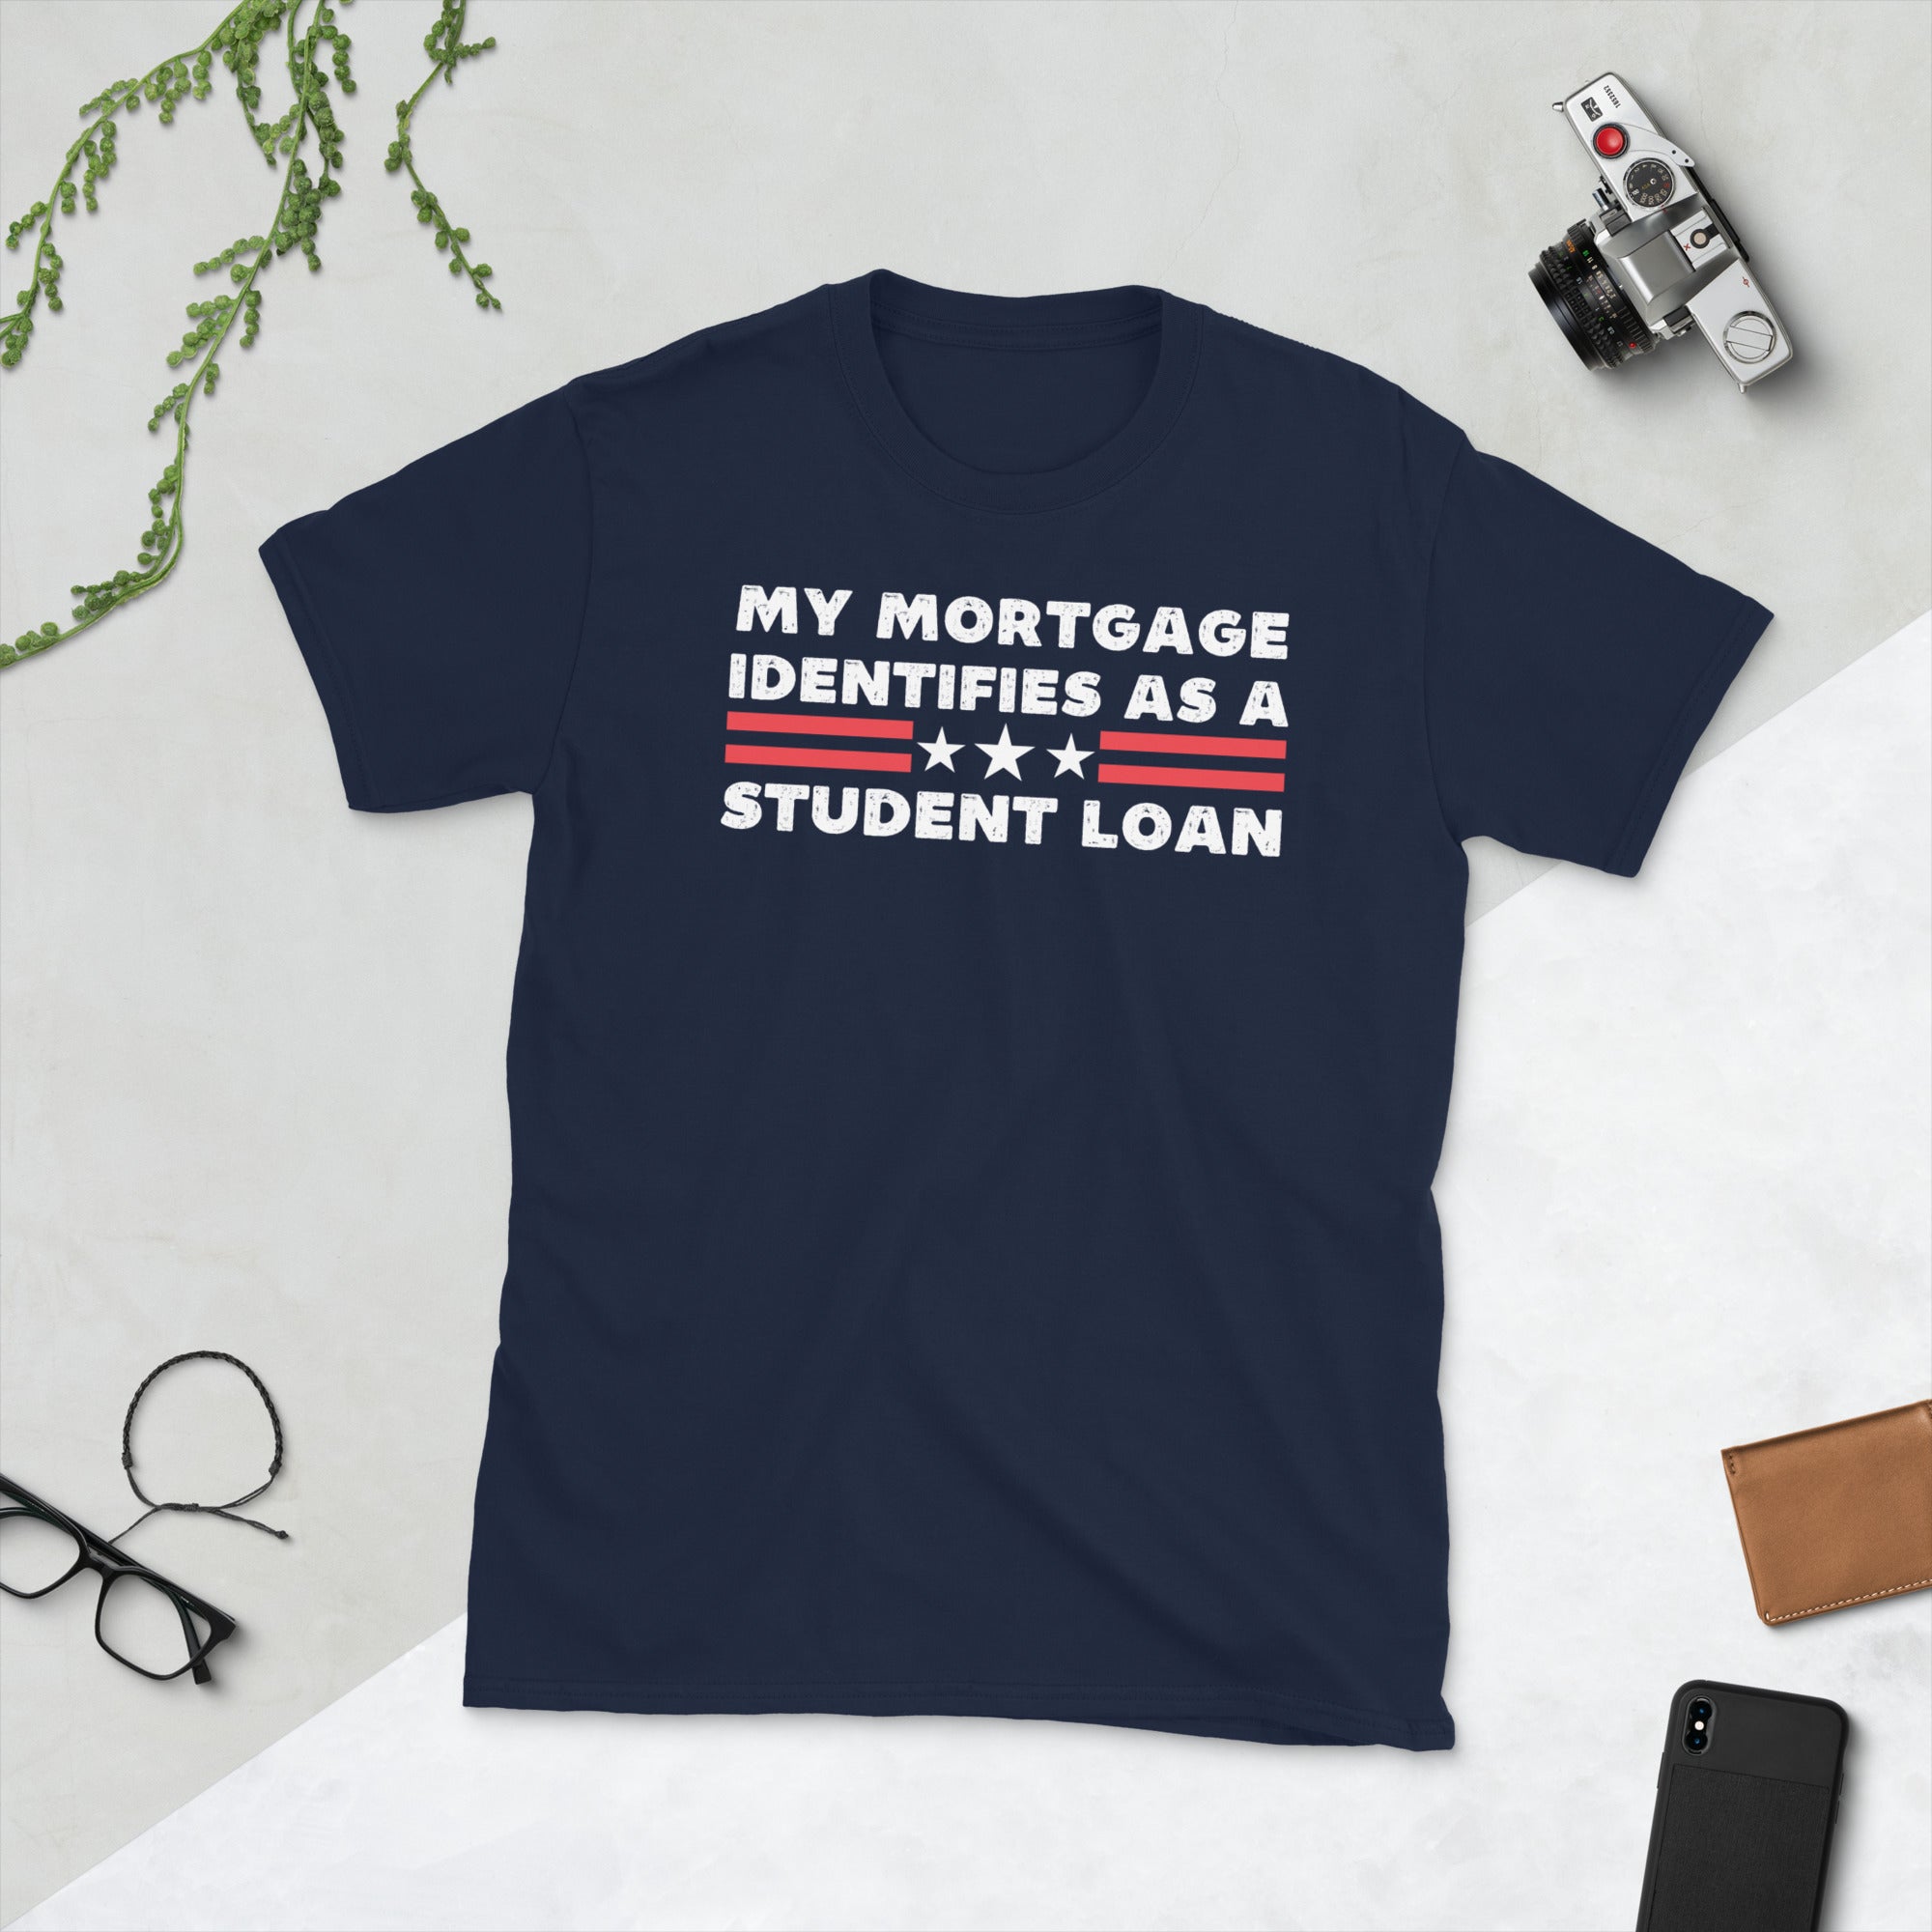 My Mortgage Identifies As A Student Loan, Funny Republican Shirt, Student Loan Forgiveness, FJB Shirt, American Patriot, College Students - Madeinsea©